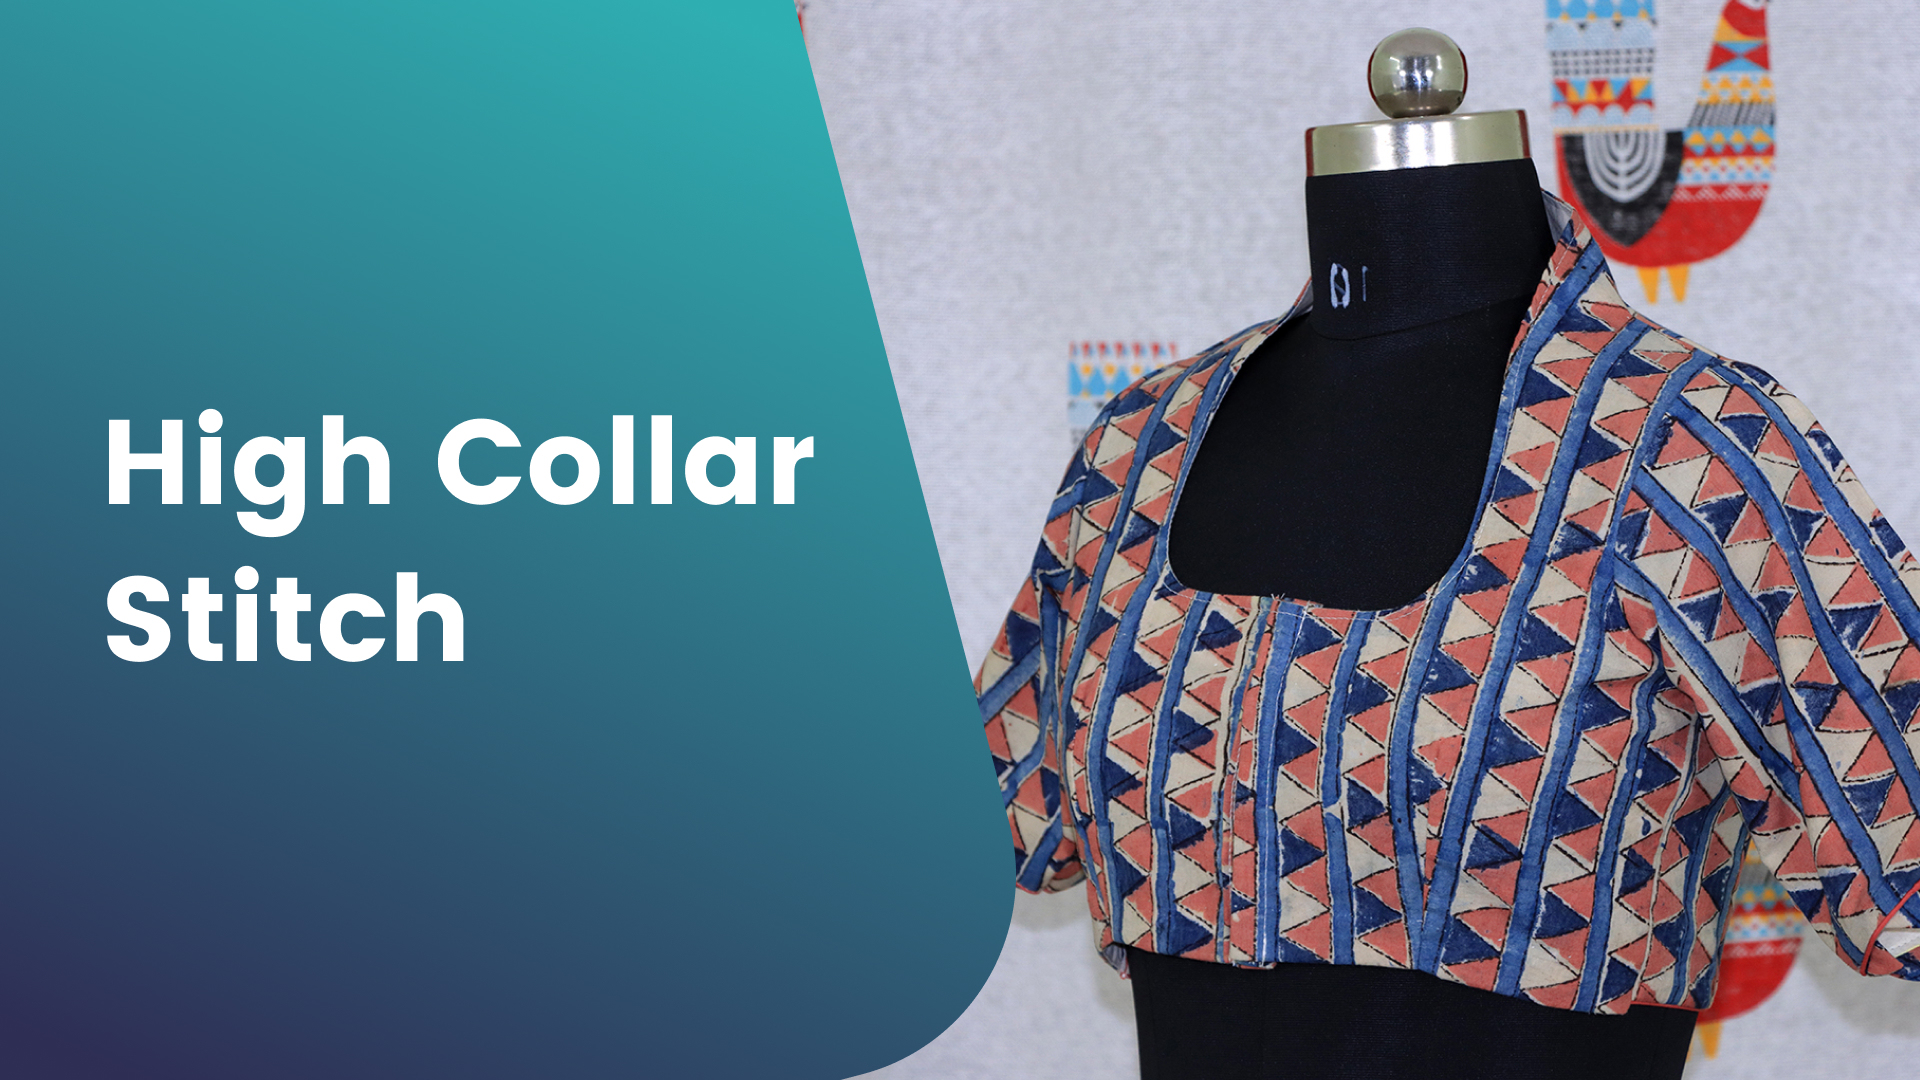 Course Trailer: Learn to Stitch a High Collar Blouse. Watch to know more.